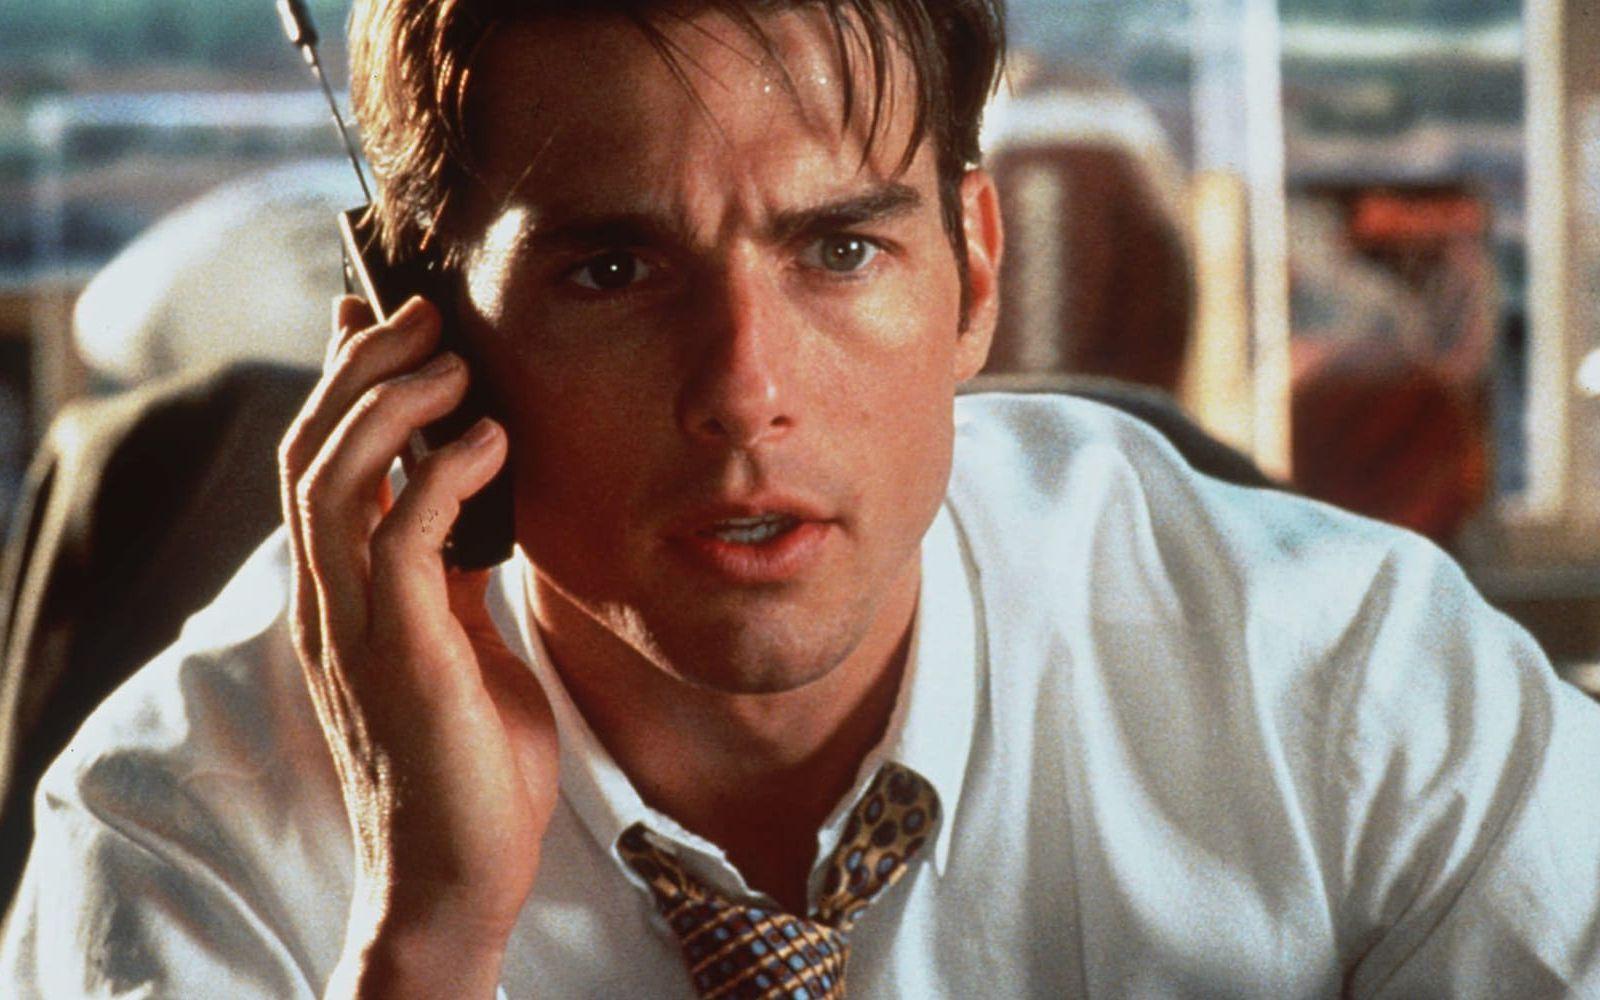 "Show me the money!" – Tom Cruise som Jerry Maguire i Jerry Maguire, 1996. Foto: TT